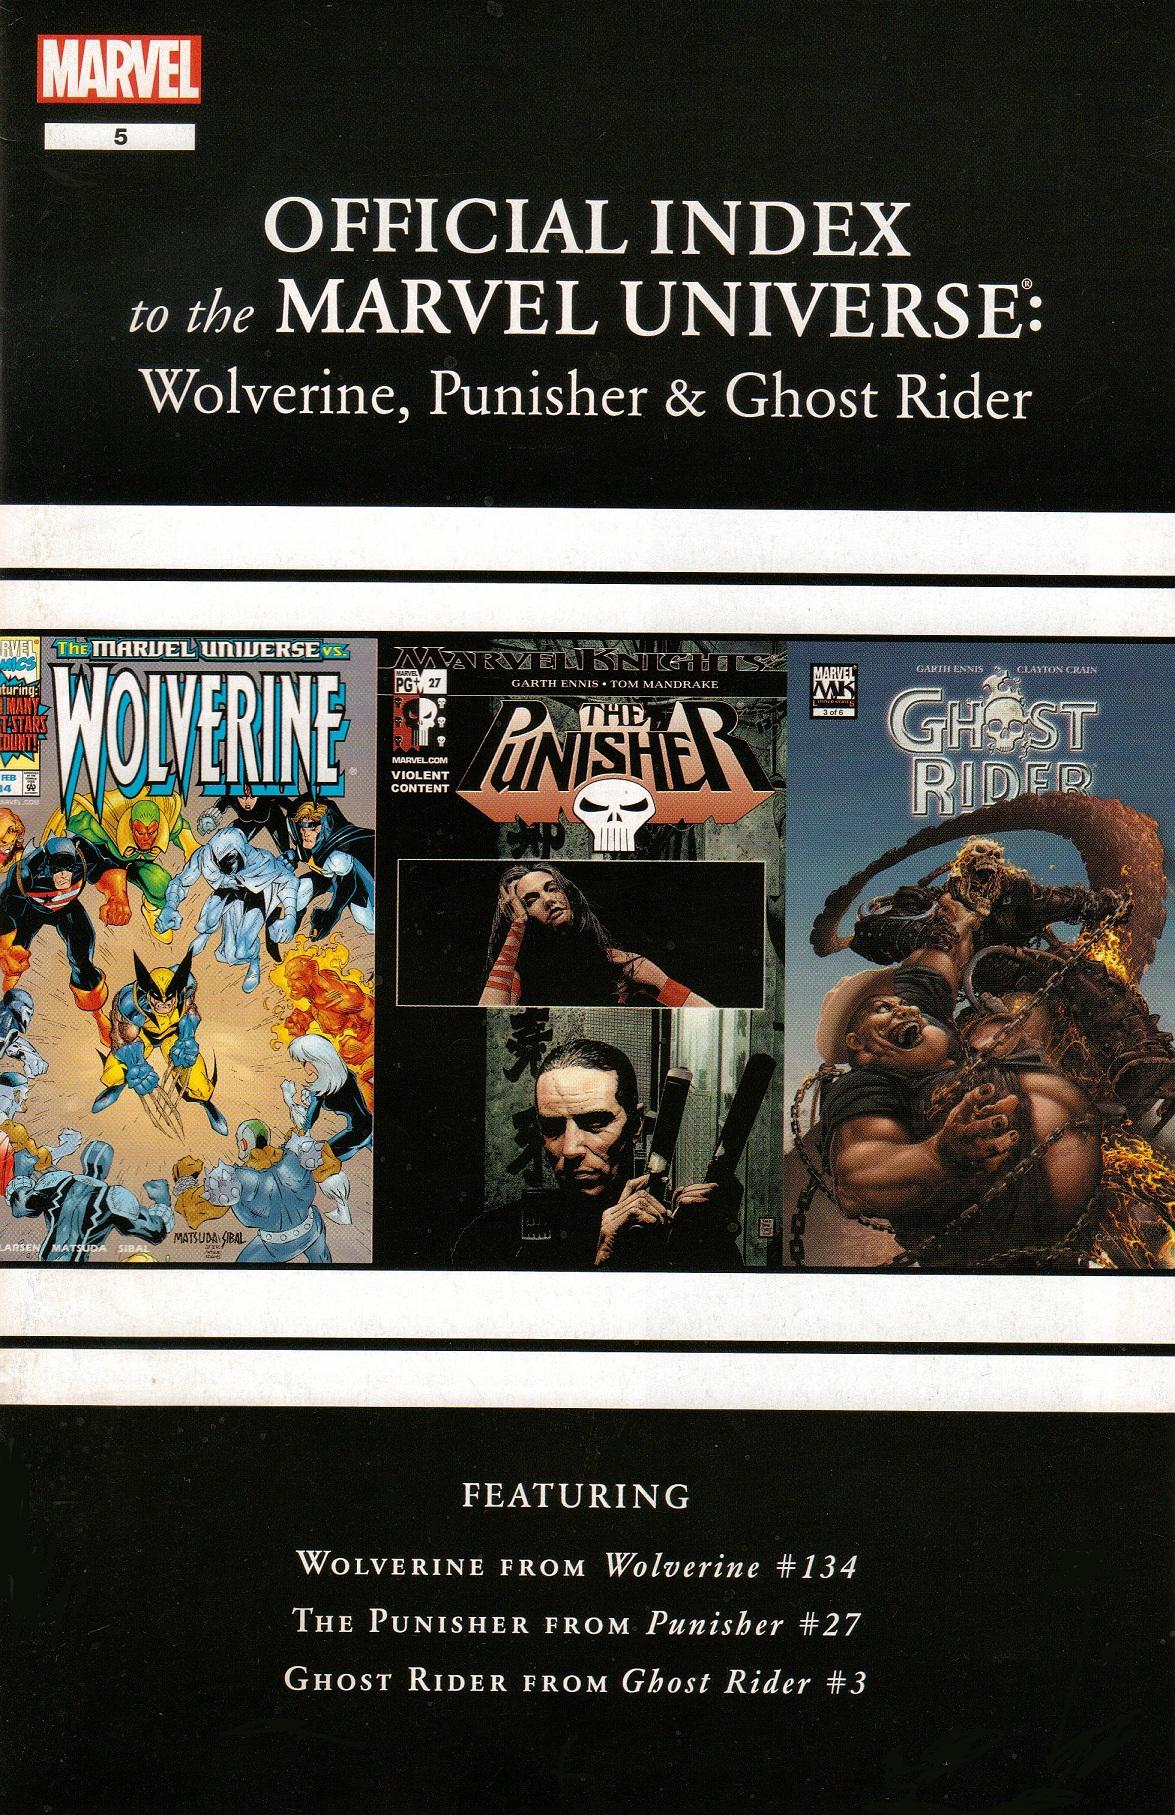 Wolverine, Punisher & Ghost Rider: Official Index to the Marvel Universe Vol. 1 #5